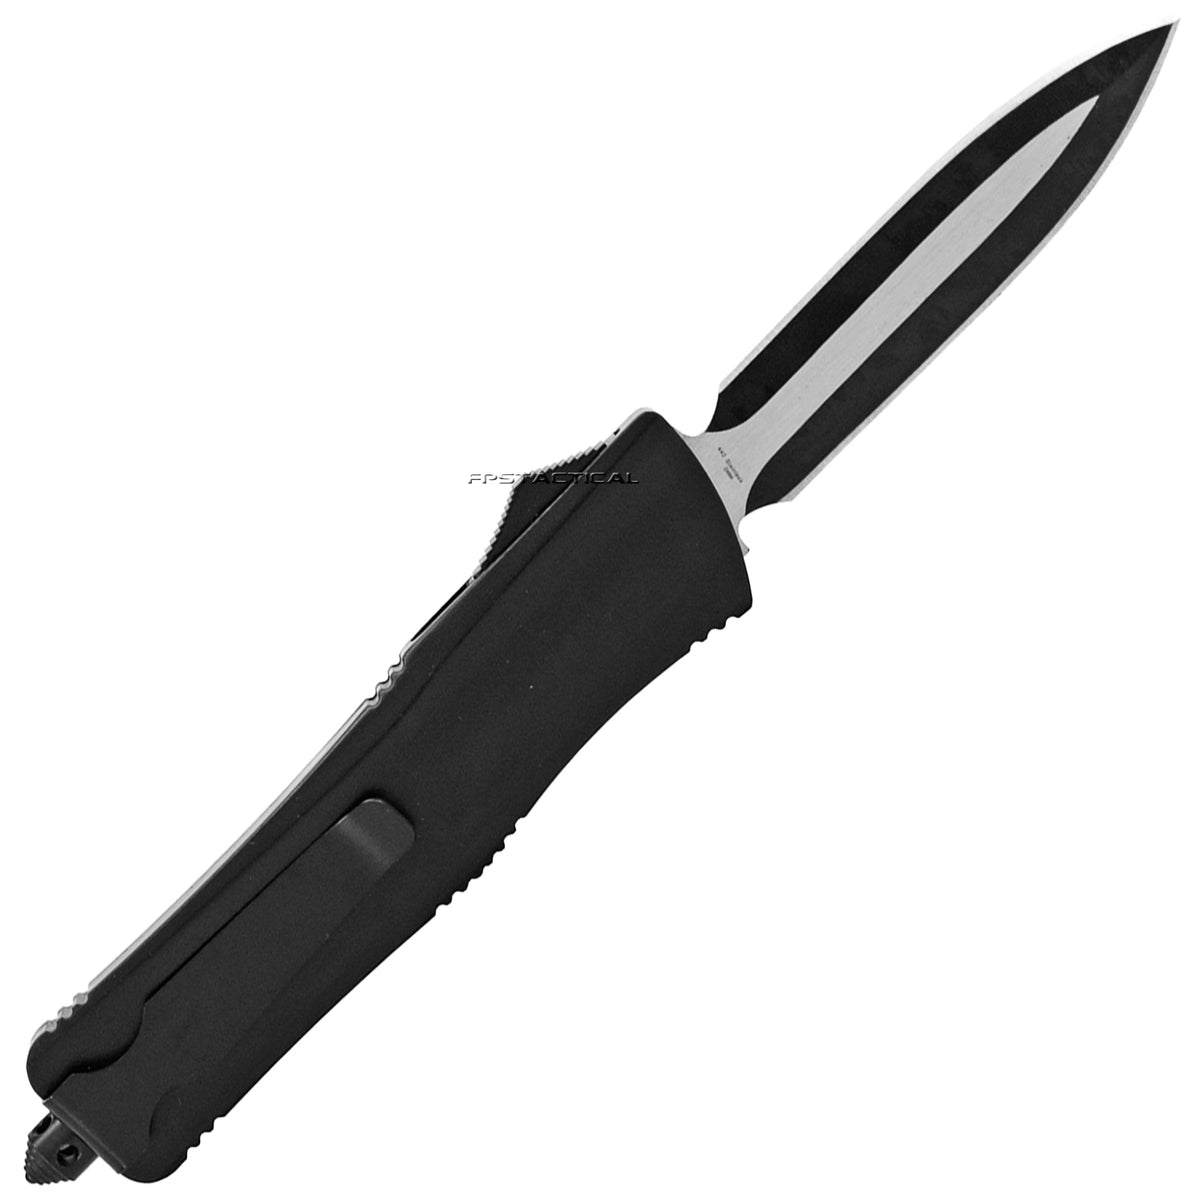 FPSTACTICAL Pinion Compact OTF Knife Black with Dual Edge Gold Blade a